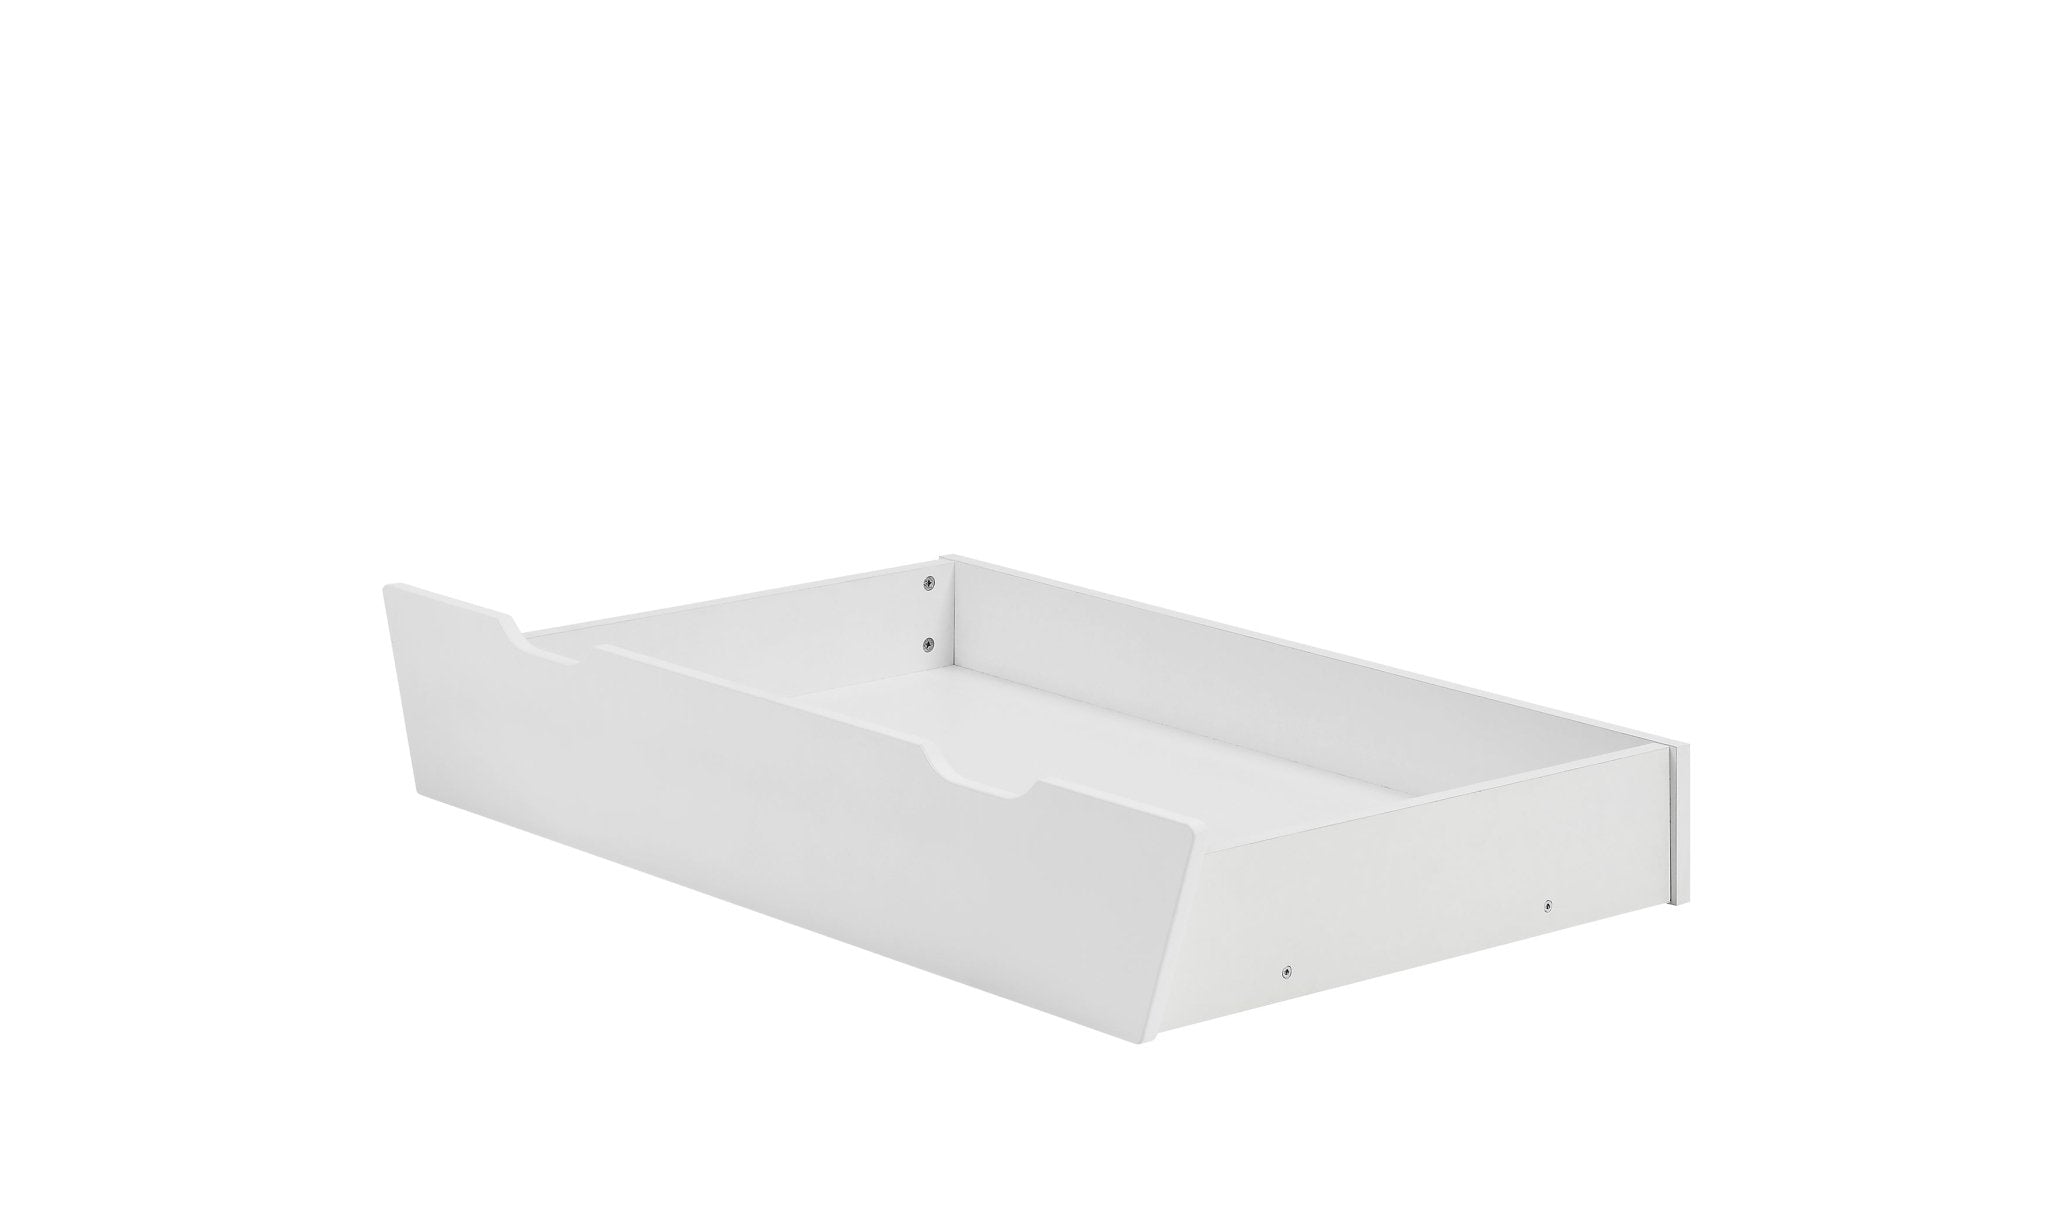 Saga Bed/Cot, 3 growing functions 140 x 70 cm White color - Scandinavian Stories by Marton